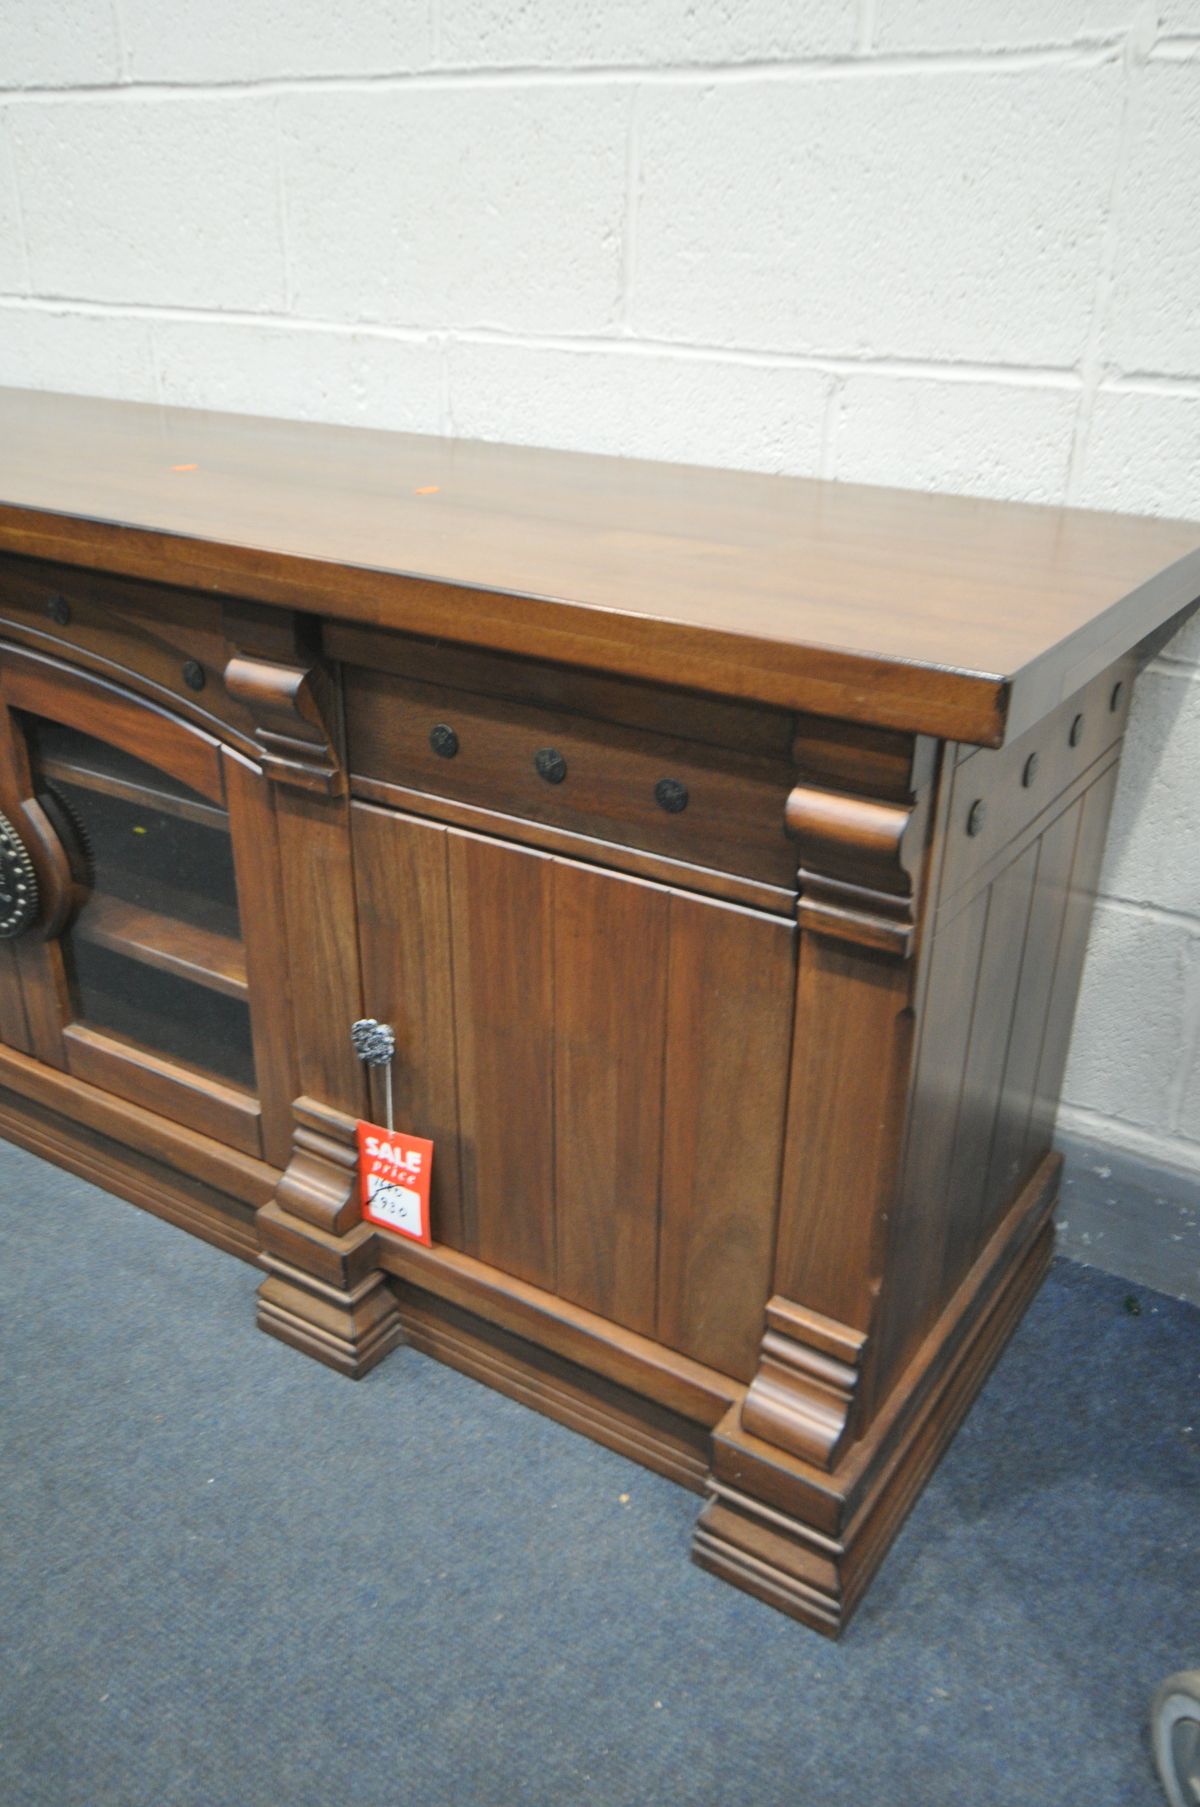 A HEAVY CHERRYWOOD SIDEBOARD, with drawers, and cupboard doors, width 199cm x depth 55cm x height - Image 2 of 3